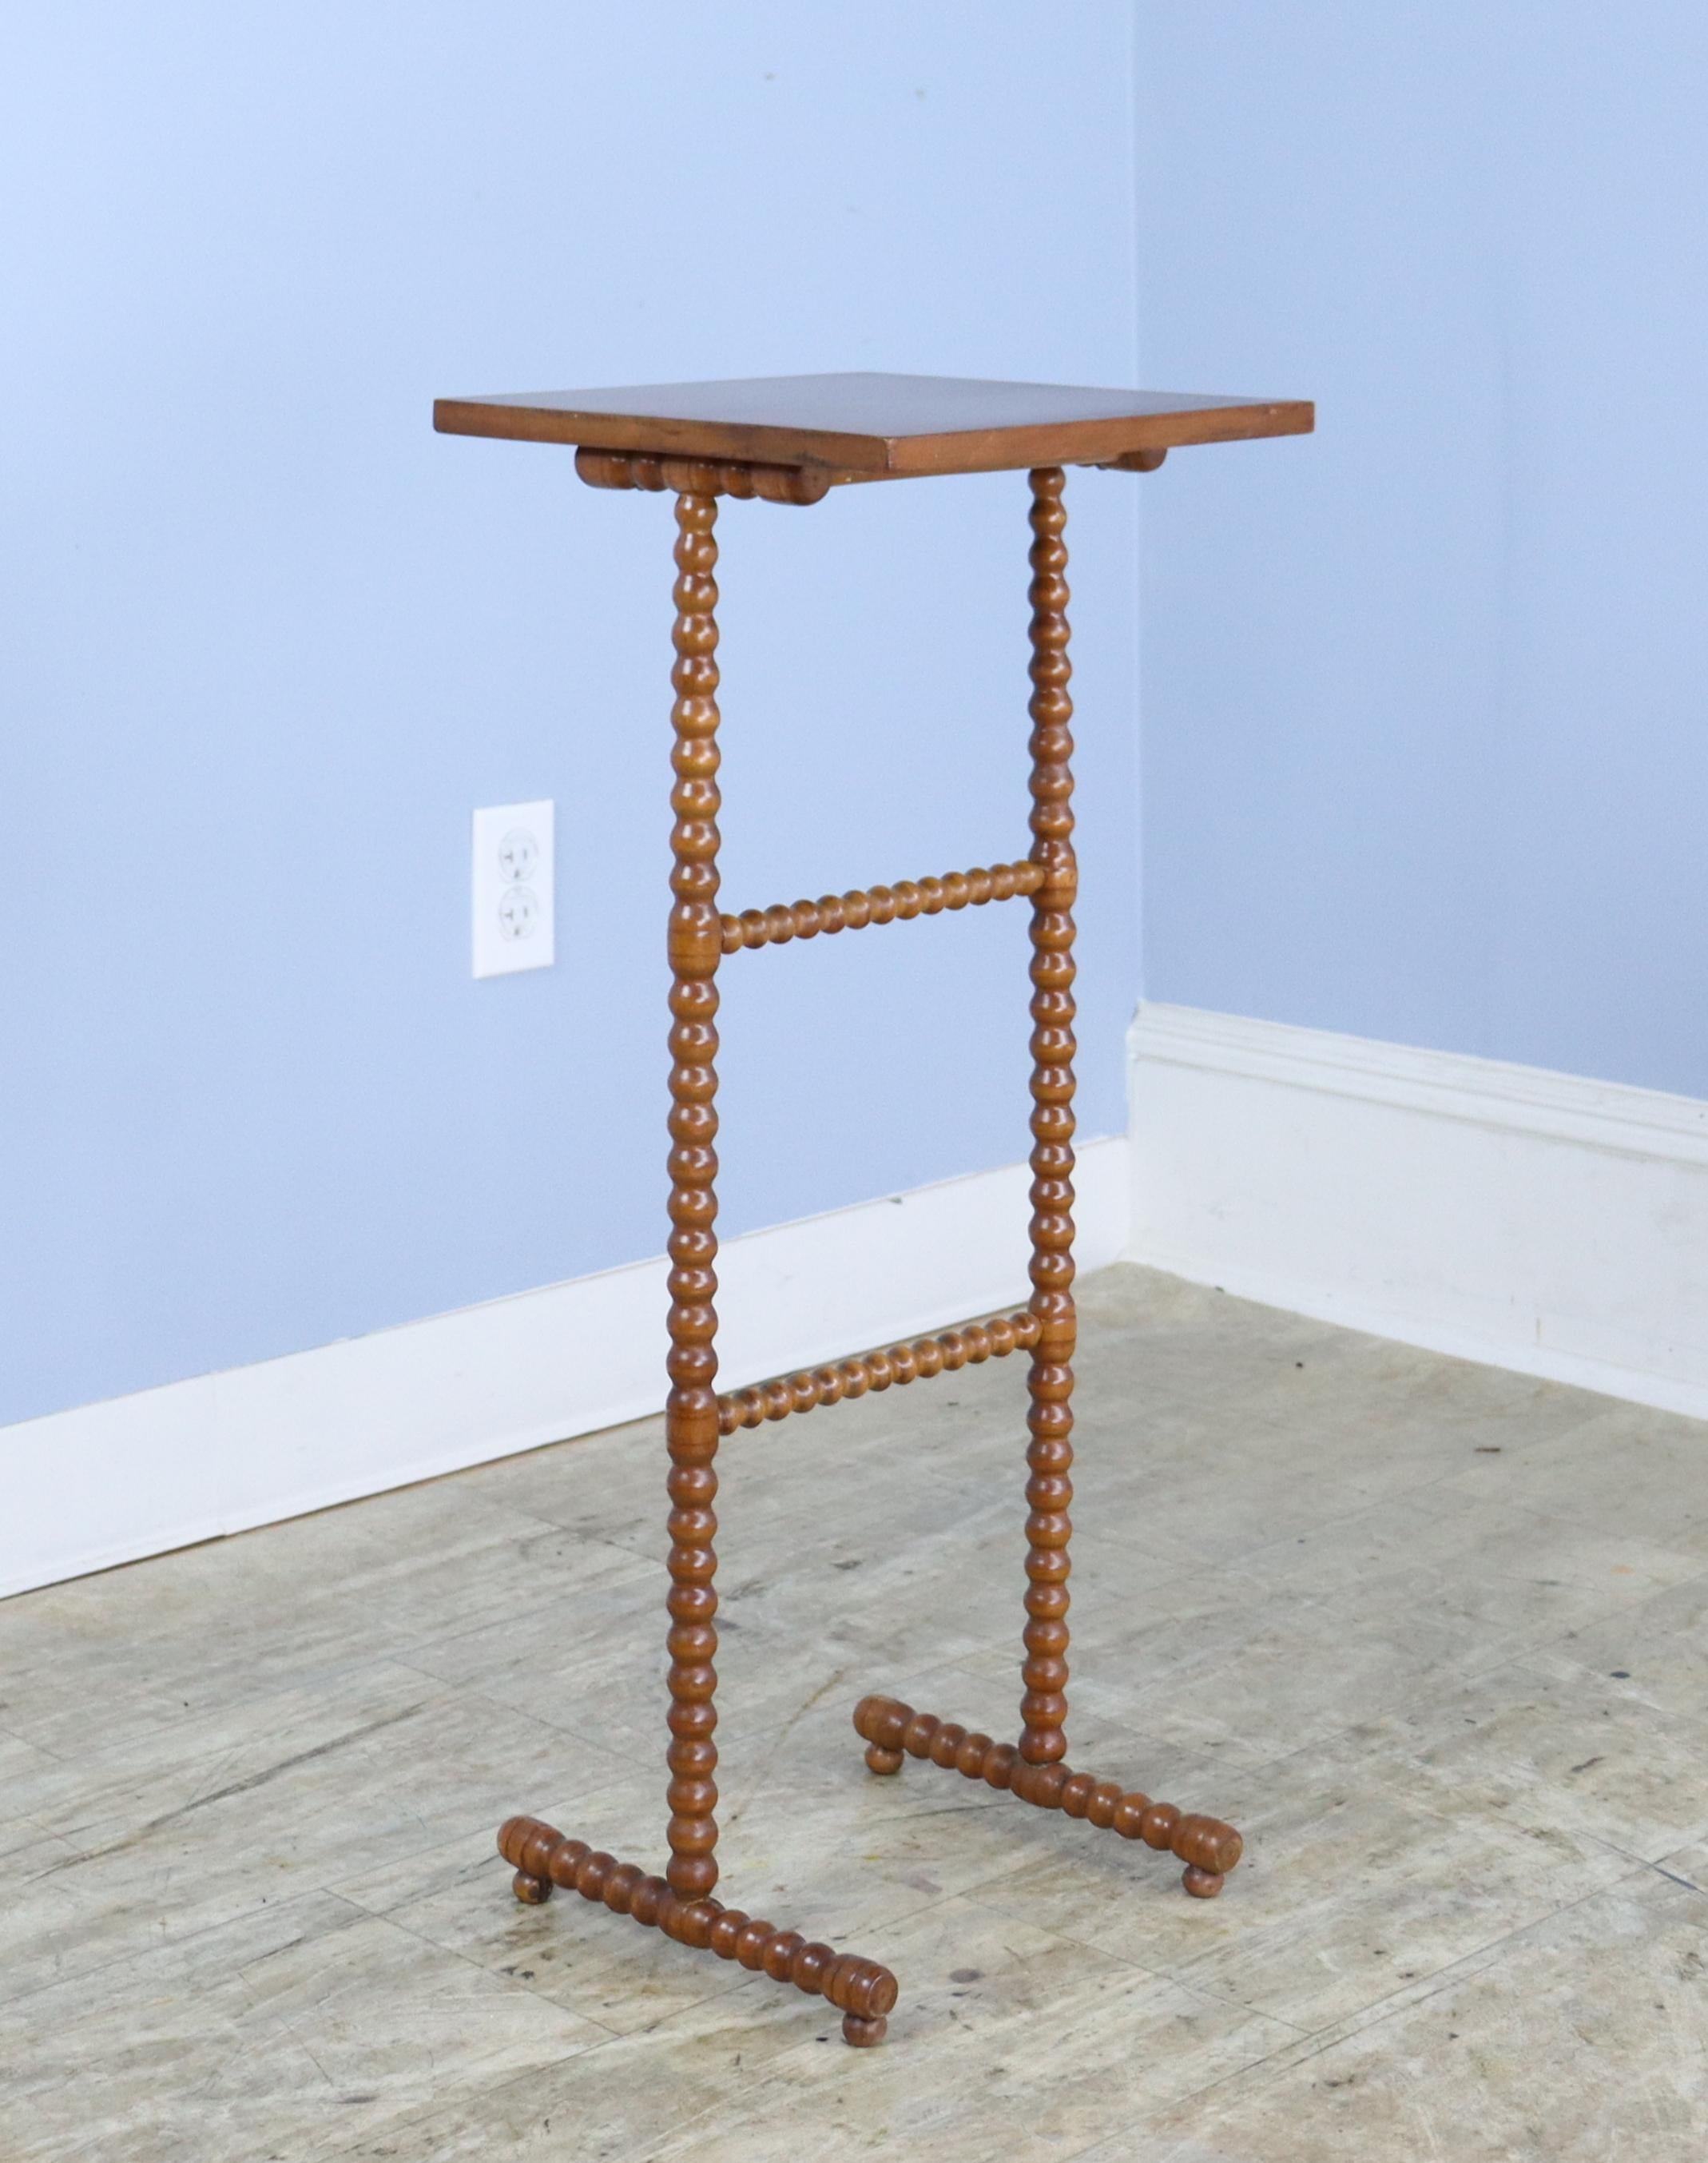 A small delicate side table with charming bobbin legs.  Would pair nicely with our other bobbin legged side table, reference number 0623-MJ8B.